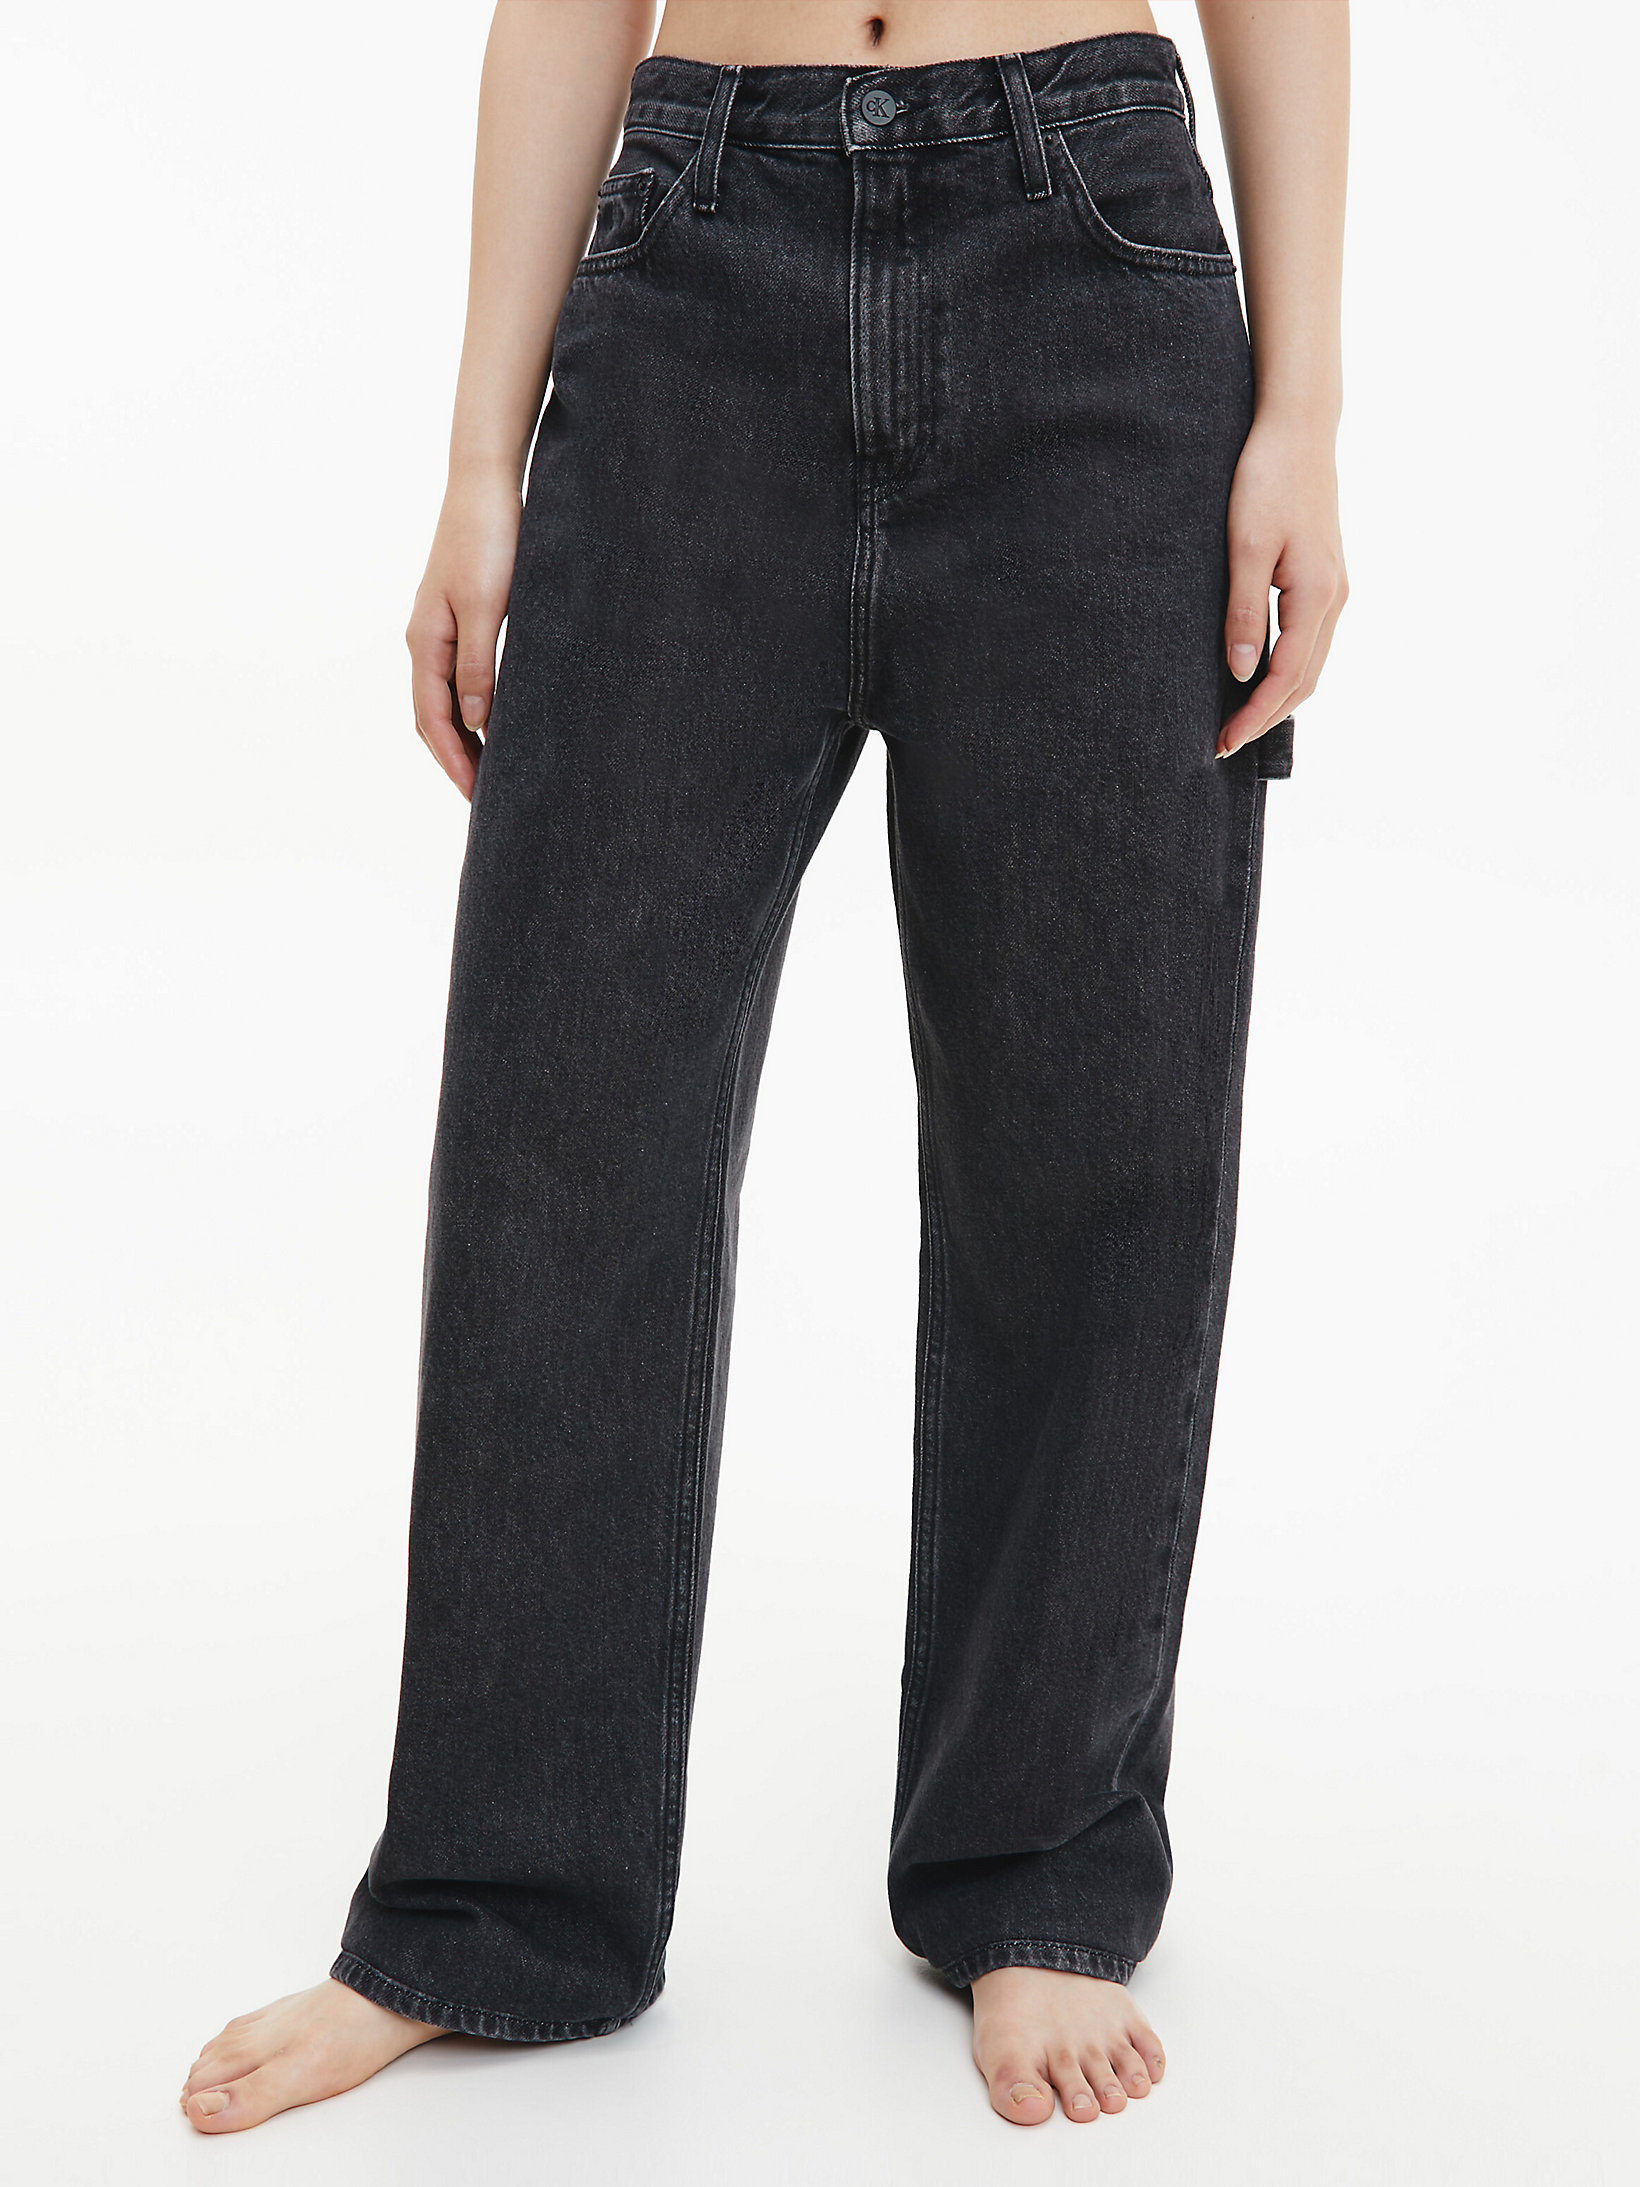 CK Black High Rise Relaxed Utility Jeans undefined women Calvin Klein